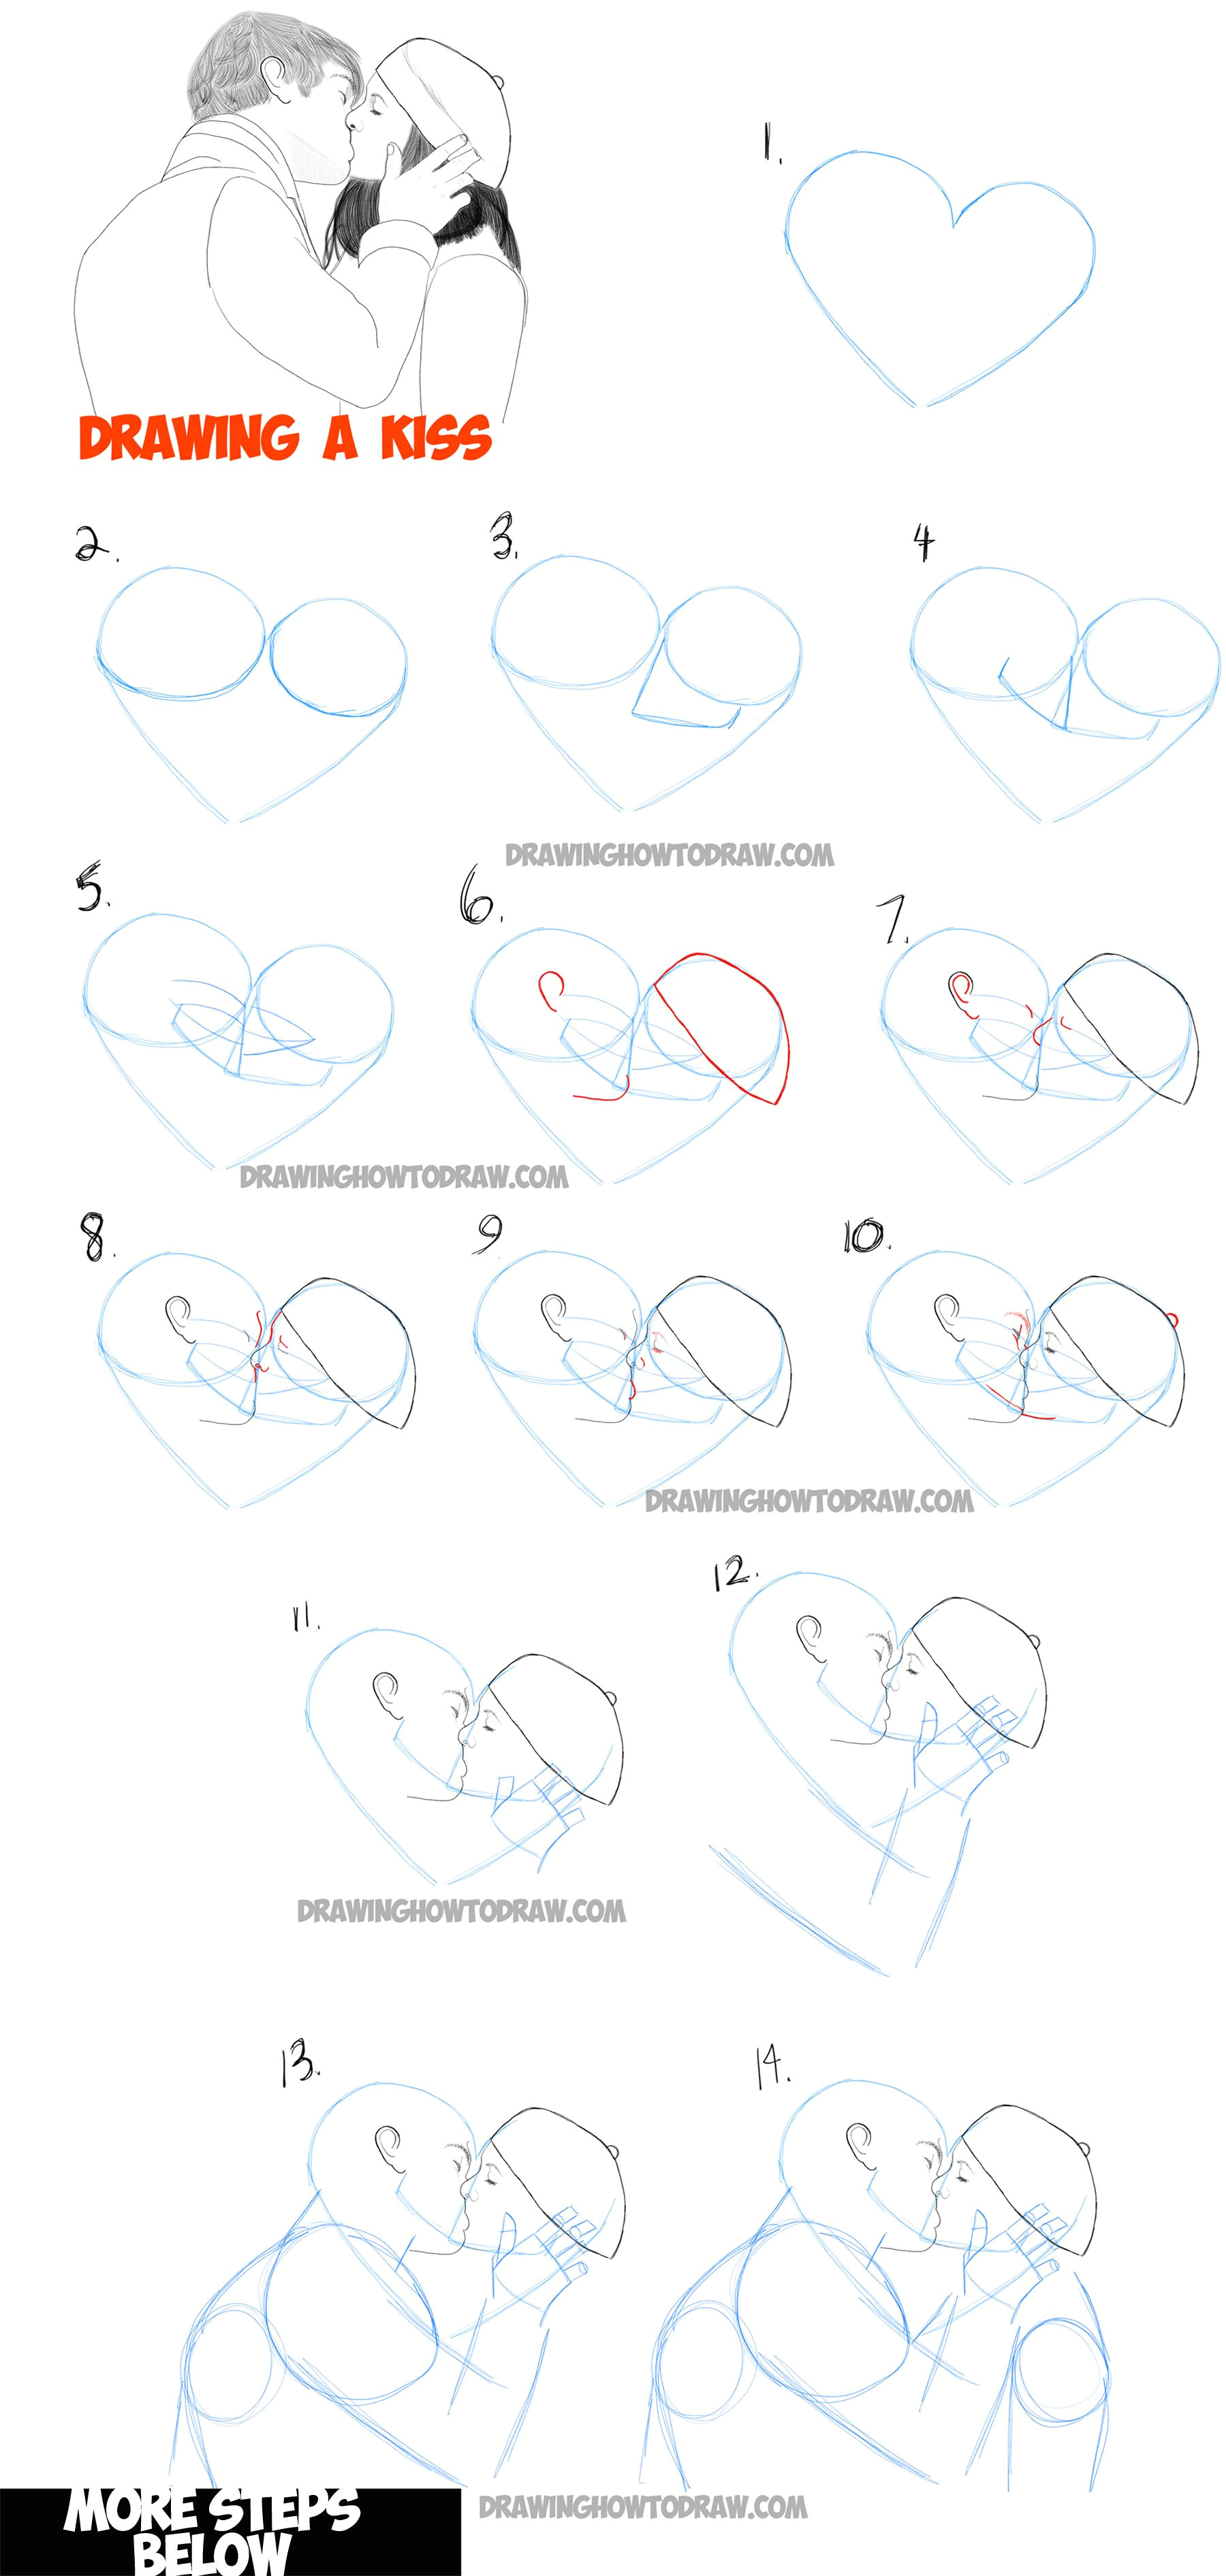 Drawing Ideas and Steps How to Draw Romantic Kisses Between Two Lovers Step by Step